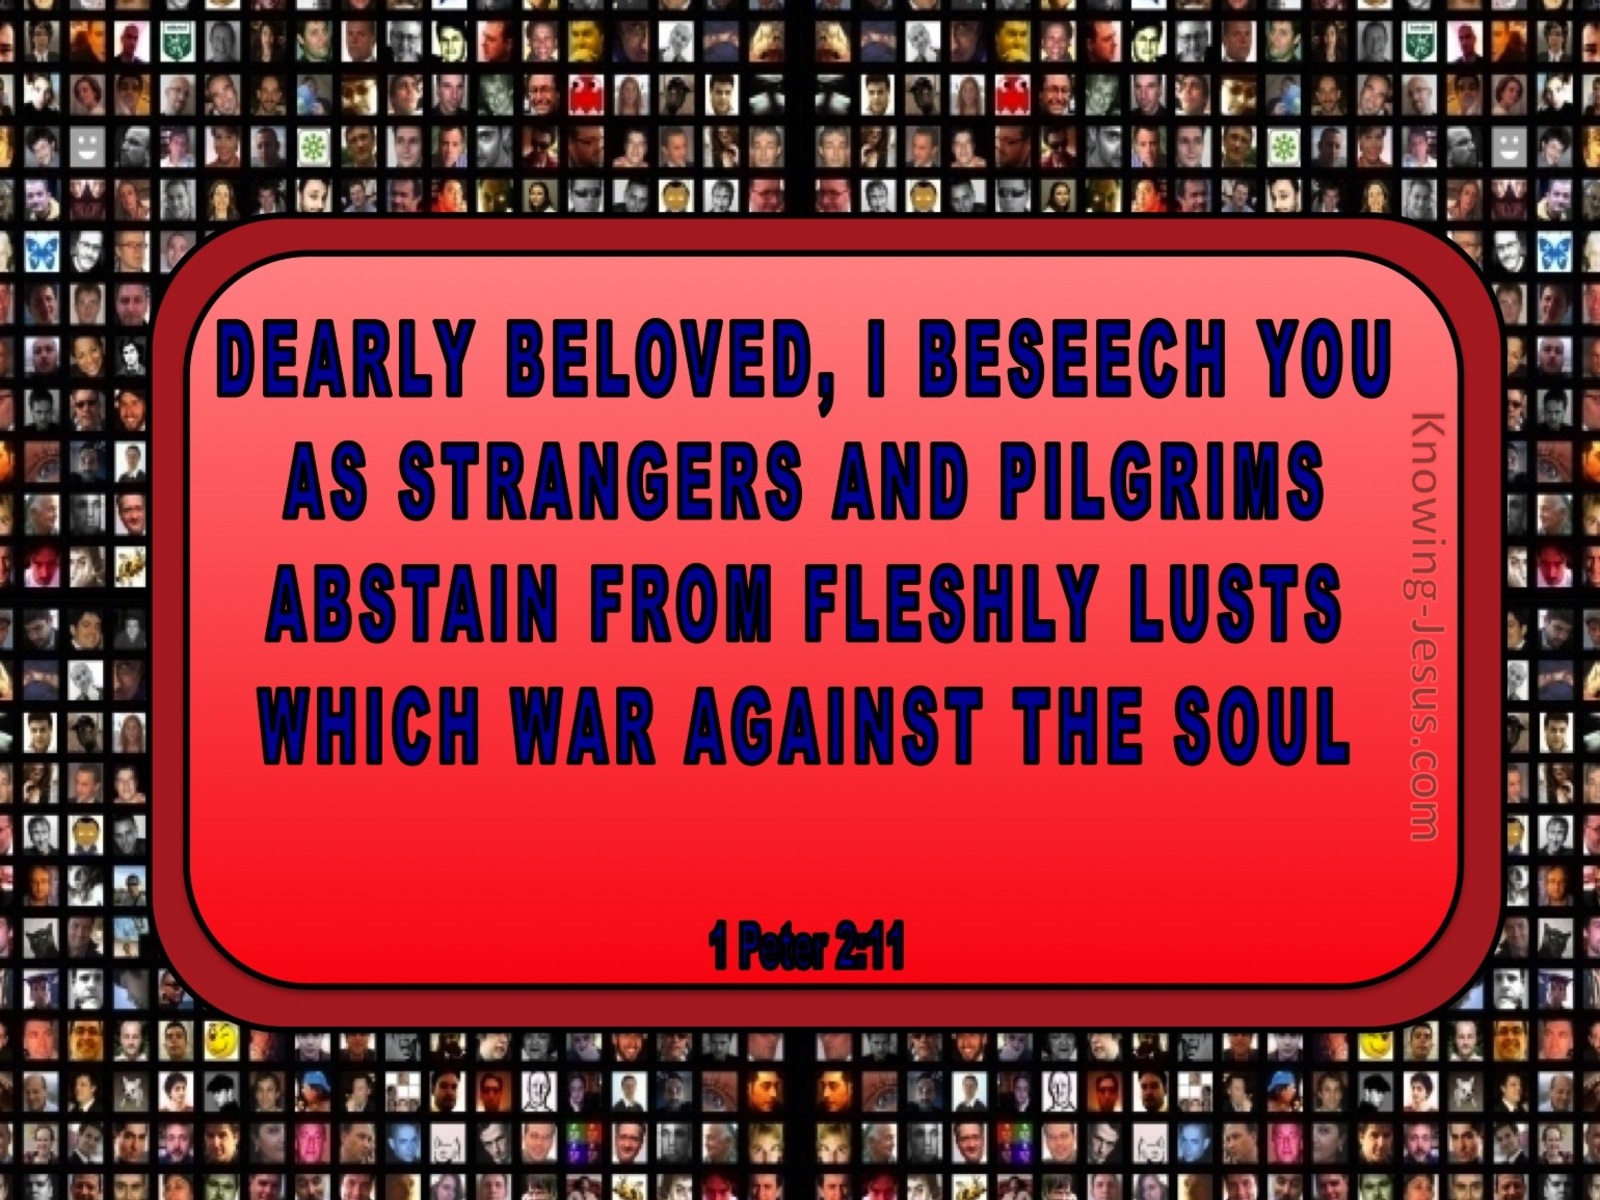 1 Peter 2:11 Abstain From Fleshly Lusts (red)